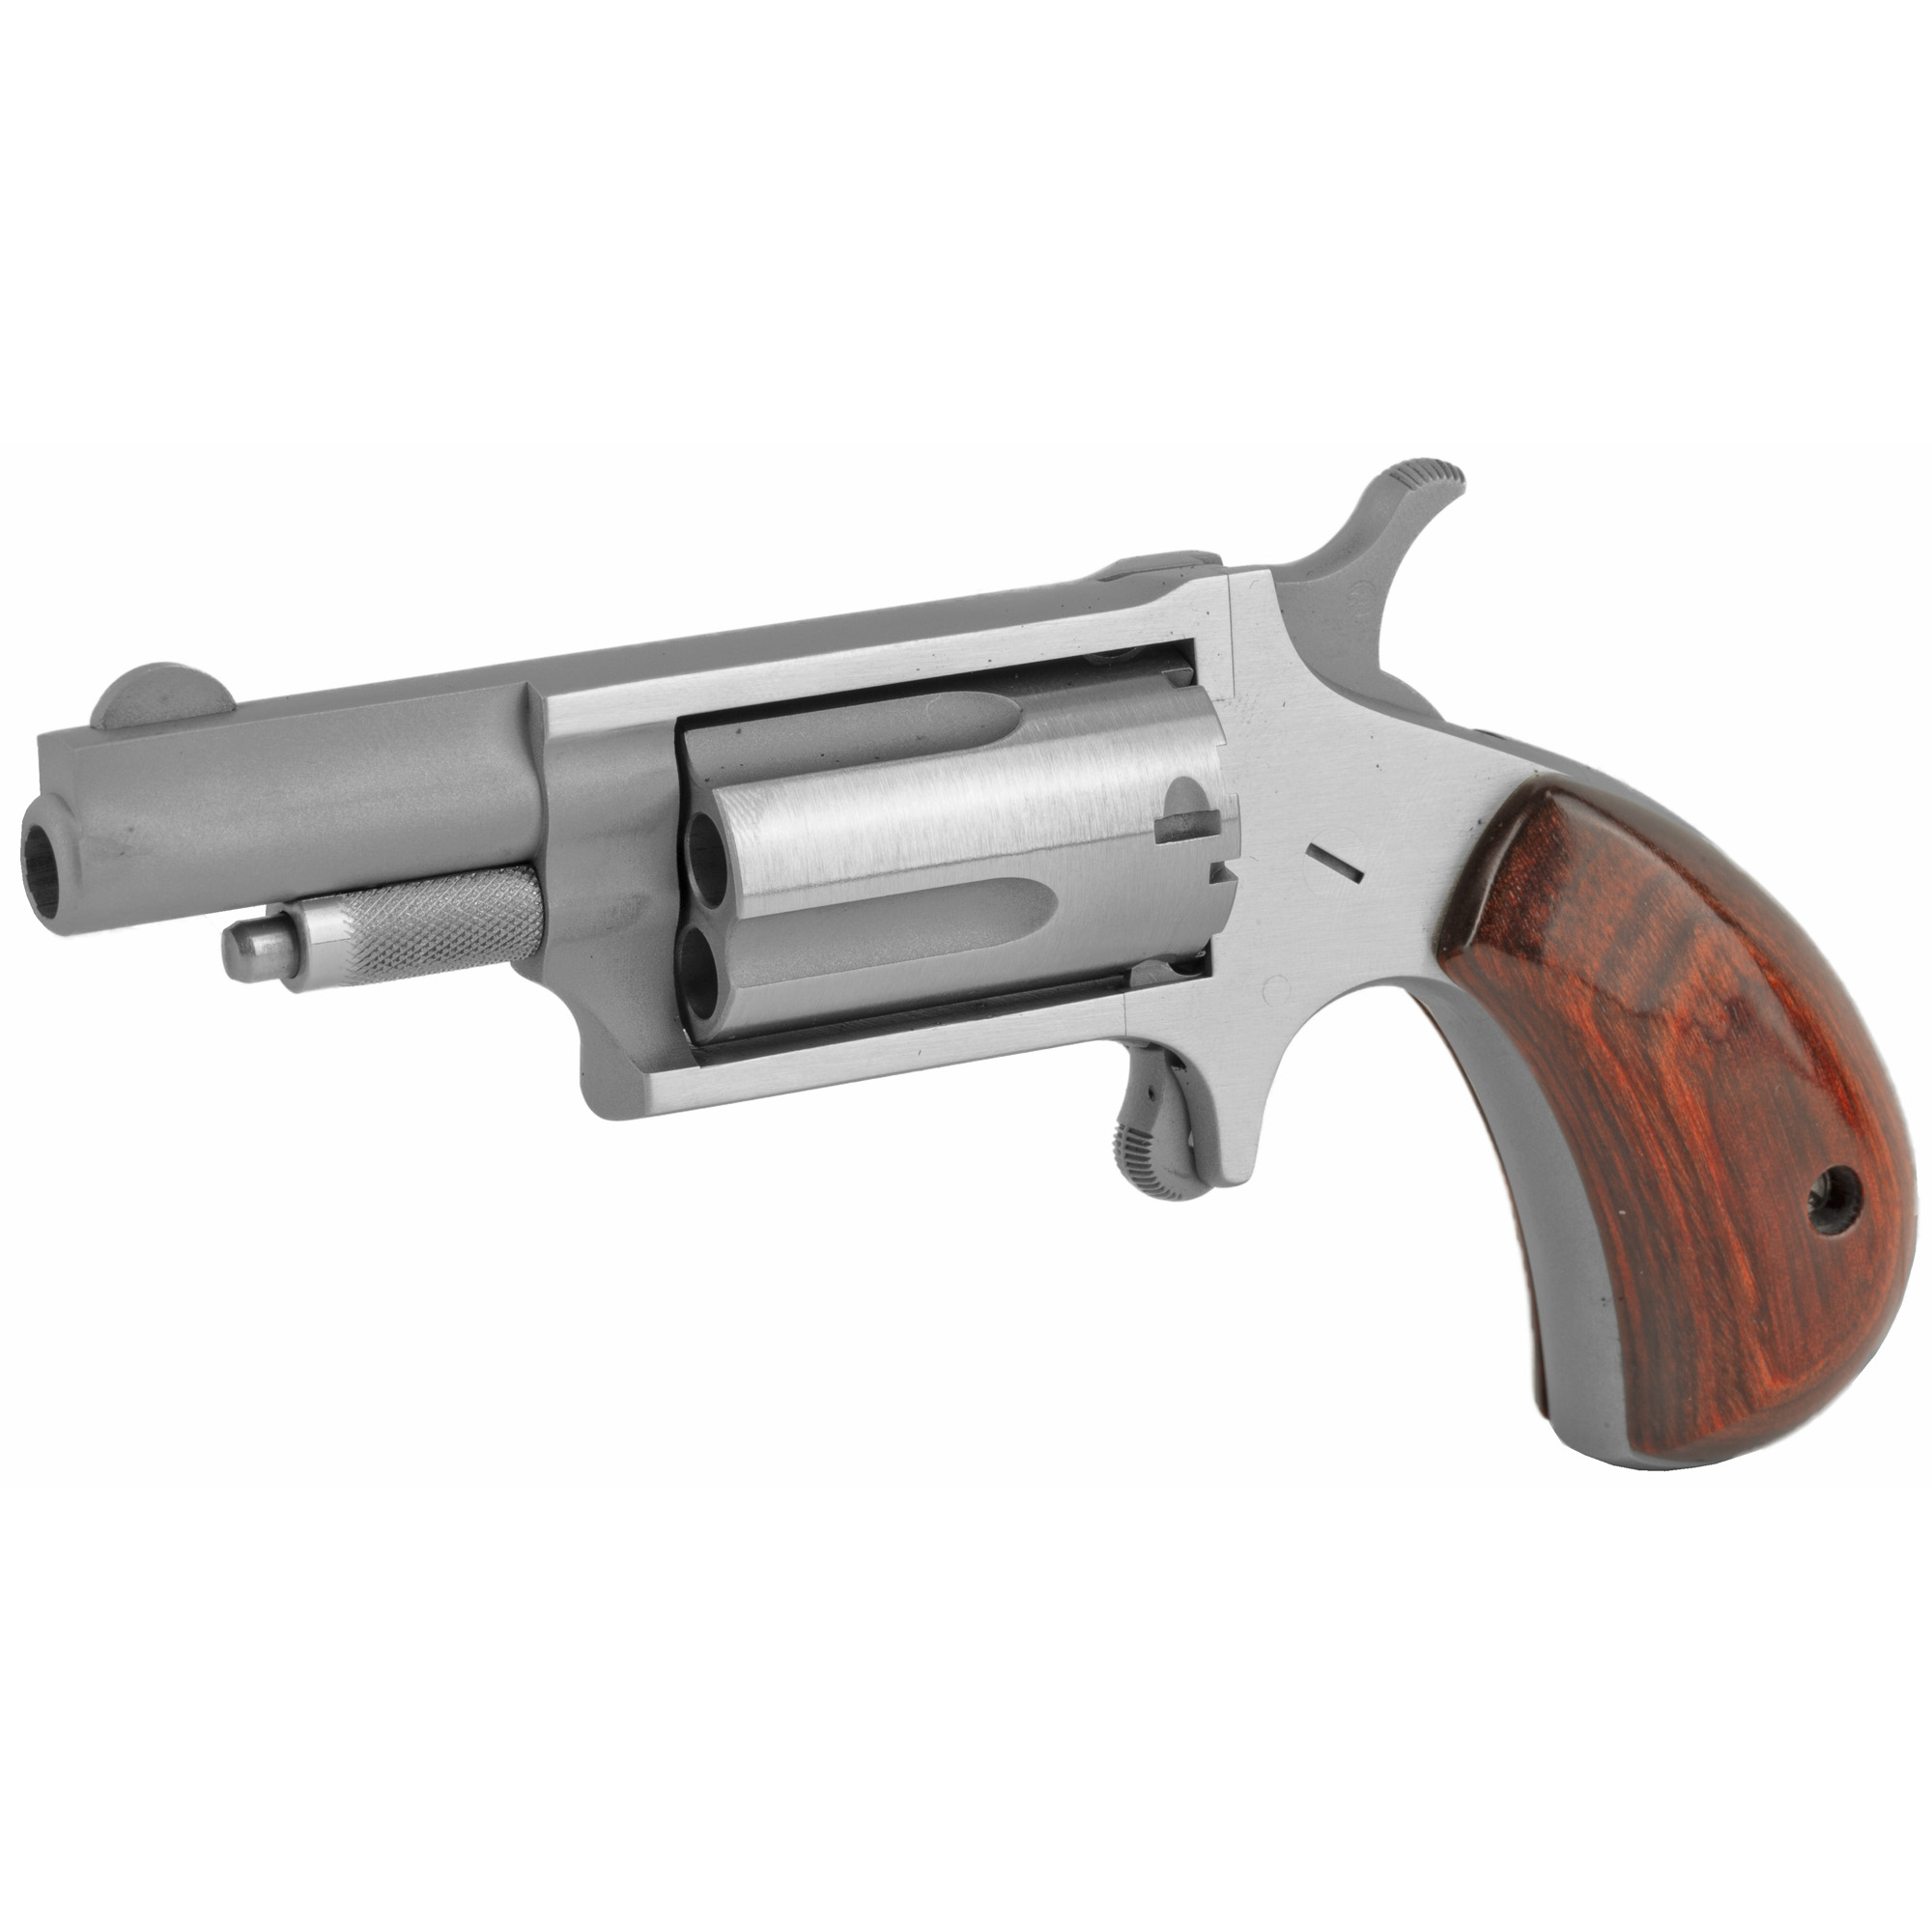 North American Arms, Mini Revolver, Single Action, Revolver, 22 WMR, 1.625" Barrel, Stainless Steel, Silver, Wood Grips, Fixed Sights, 5 Rounds